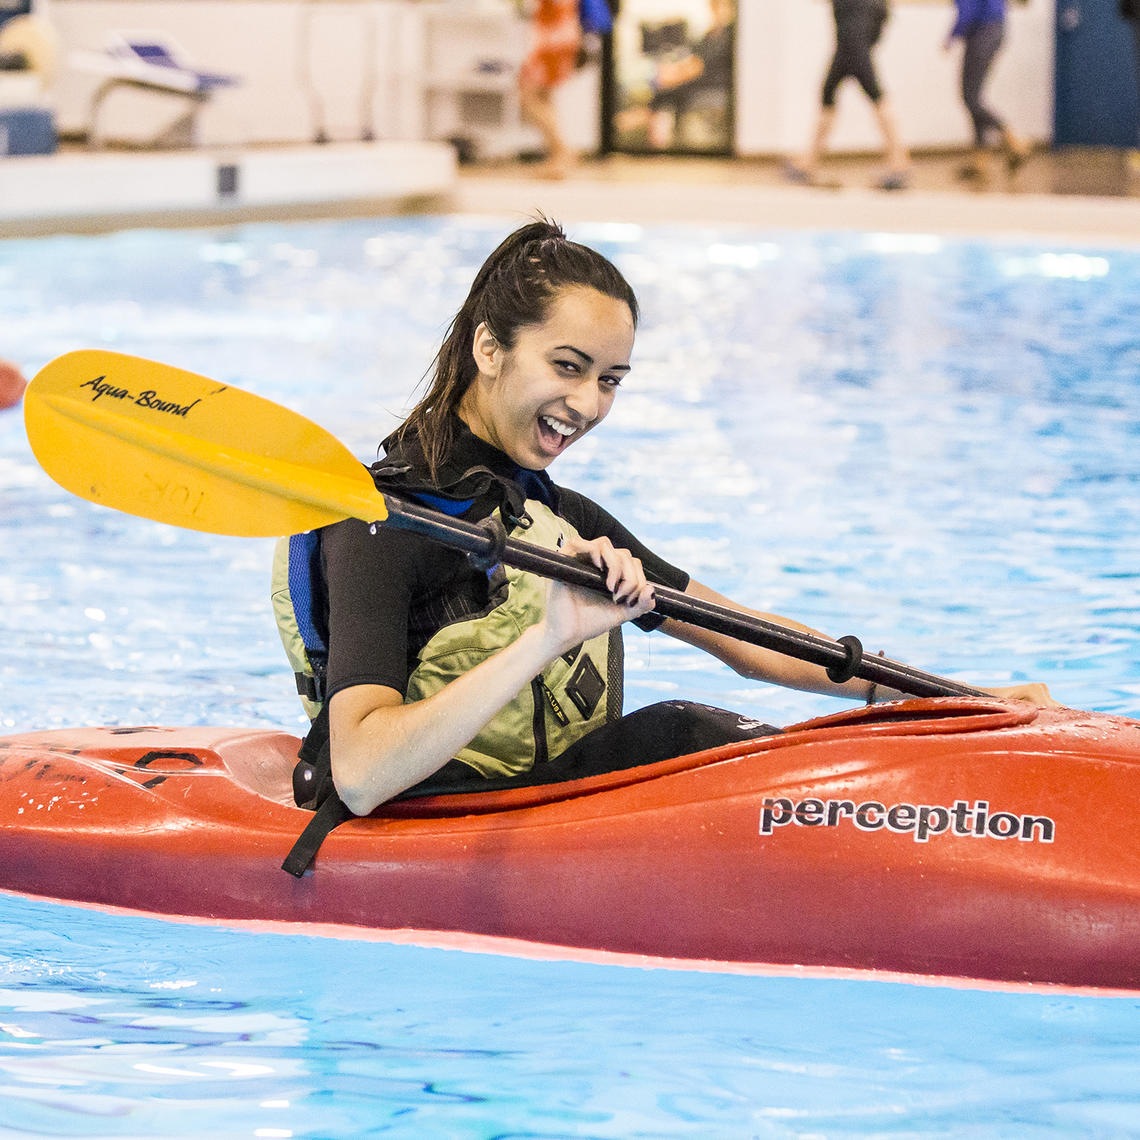 paddling course in the Aquatic Centre pool